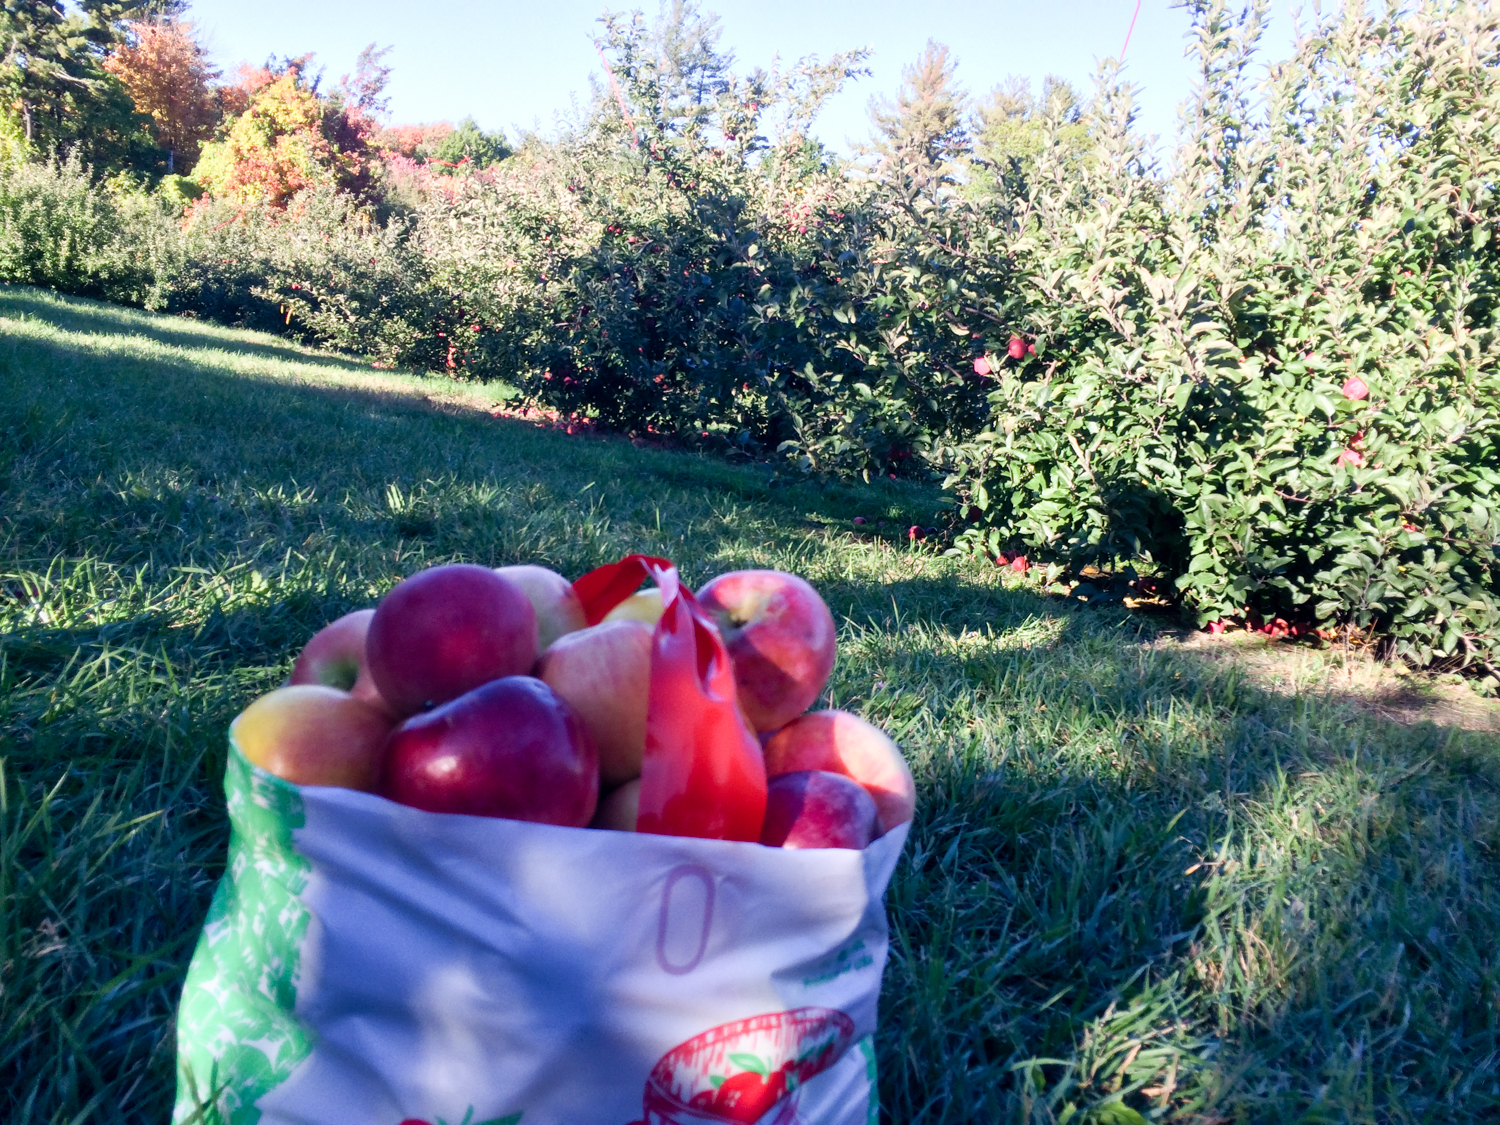 Concord apple picking Festive Fall Days: A Tour of Festivities, History, and Seasonal Fun in Massachusetts